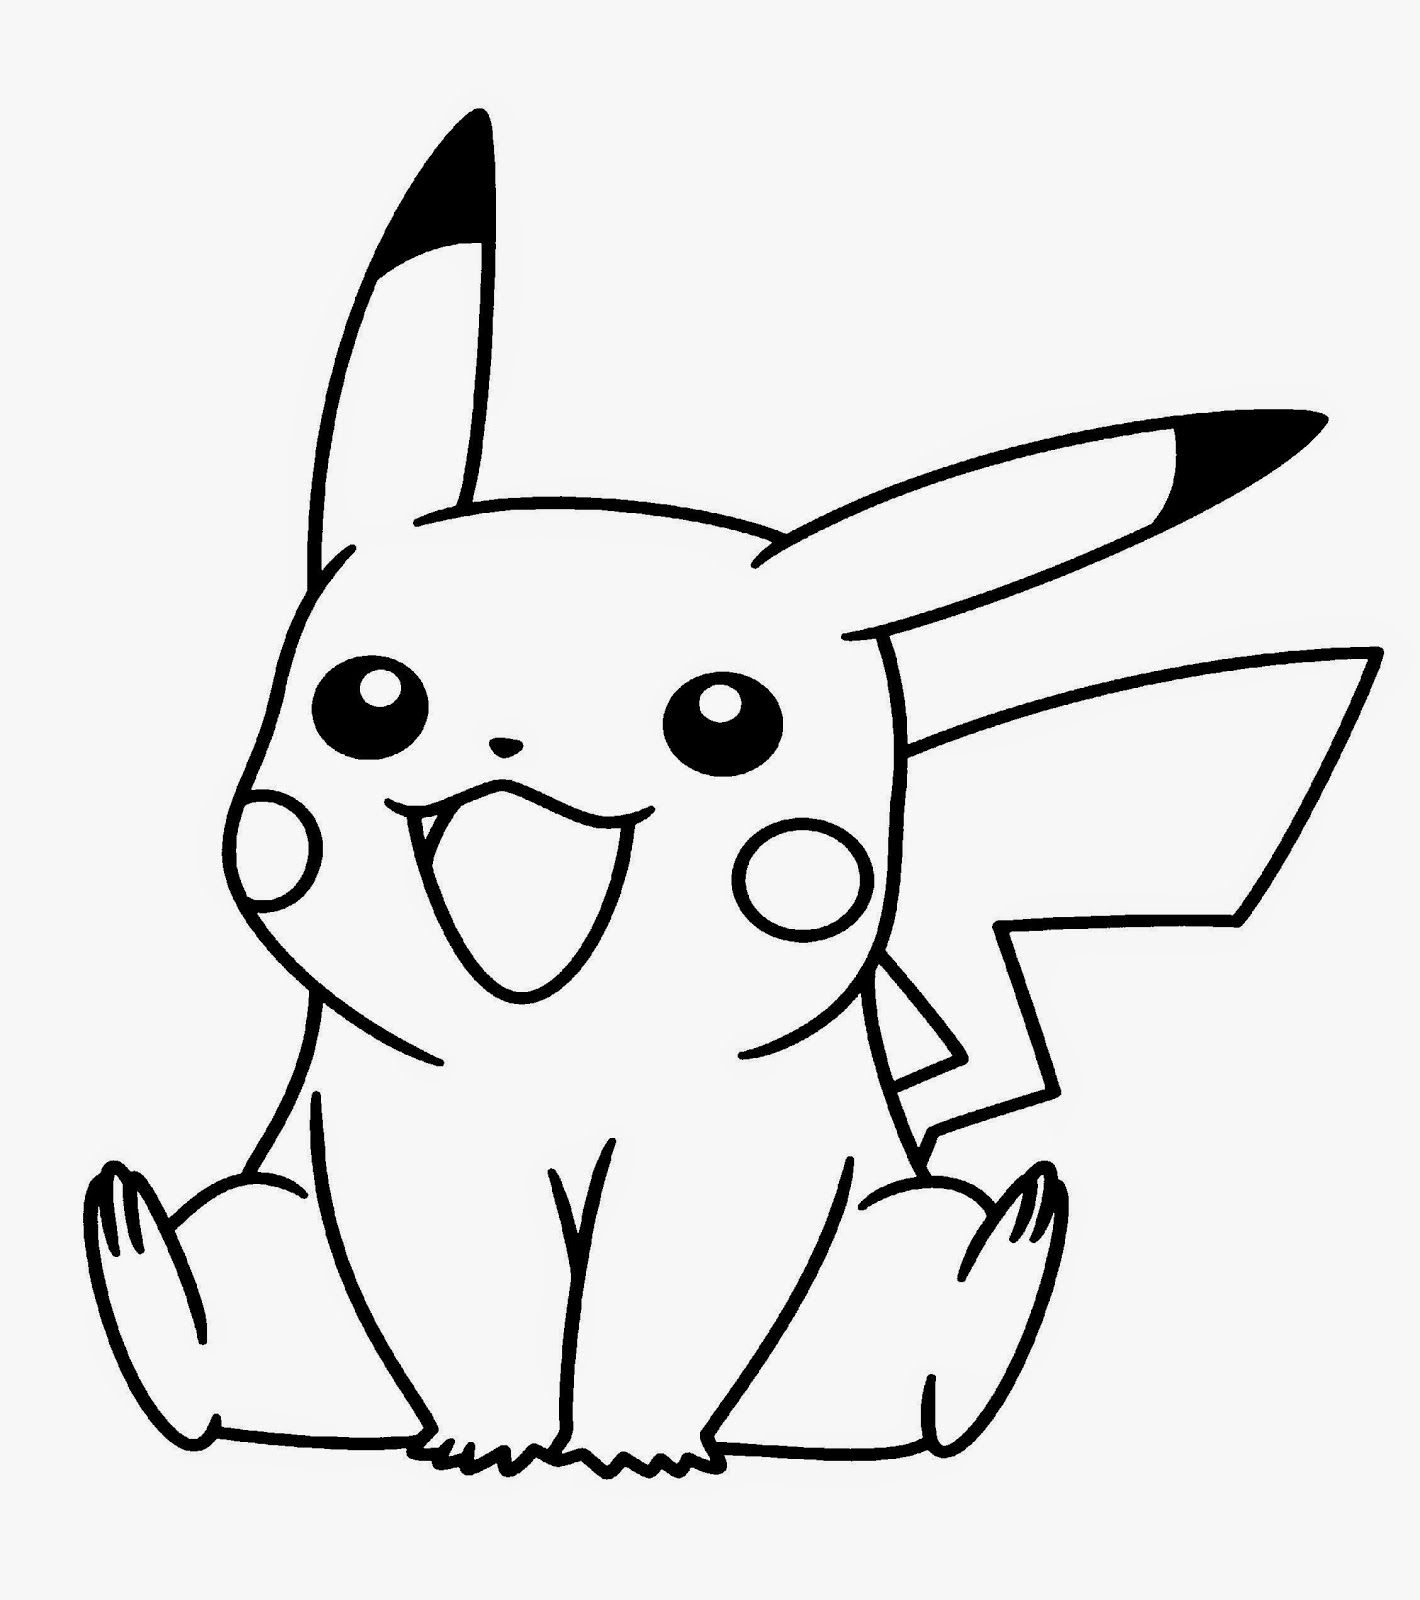 Coloring Pages Pokemon | Free Coloring Pages